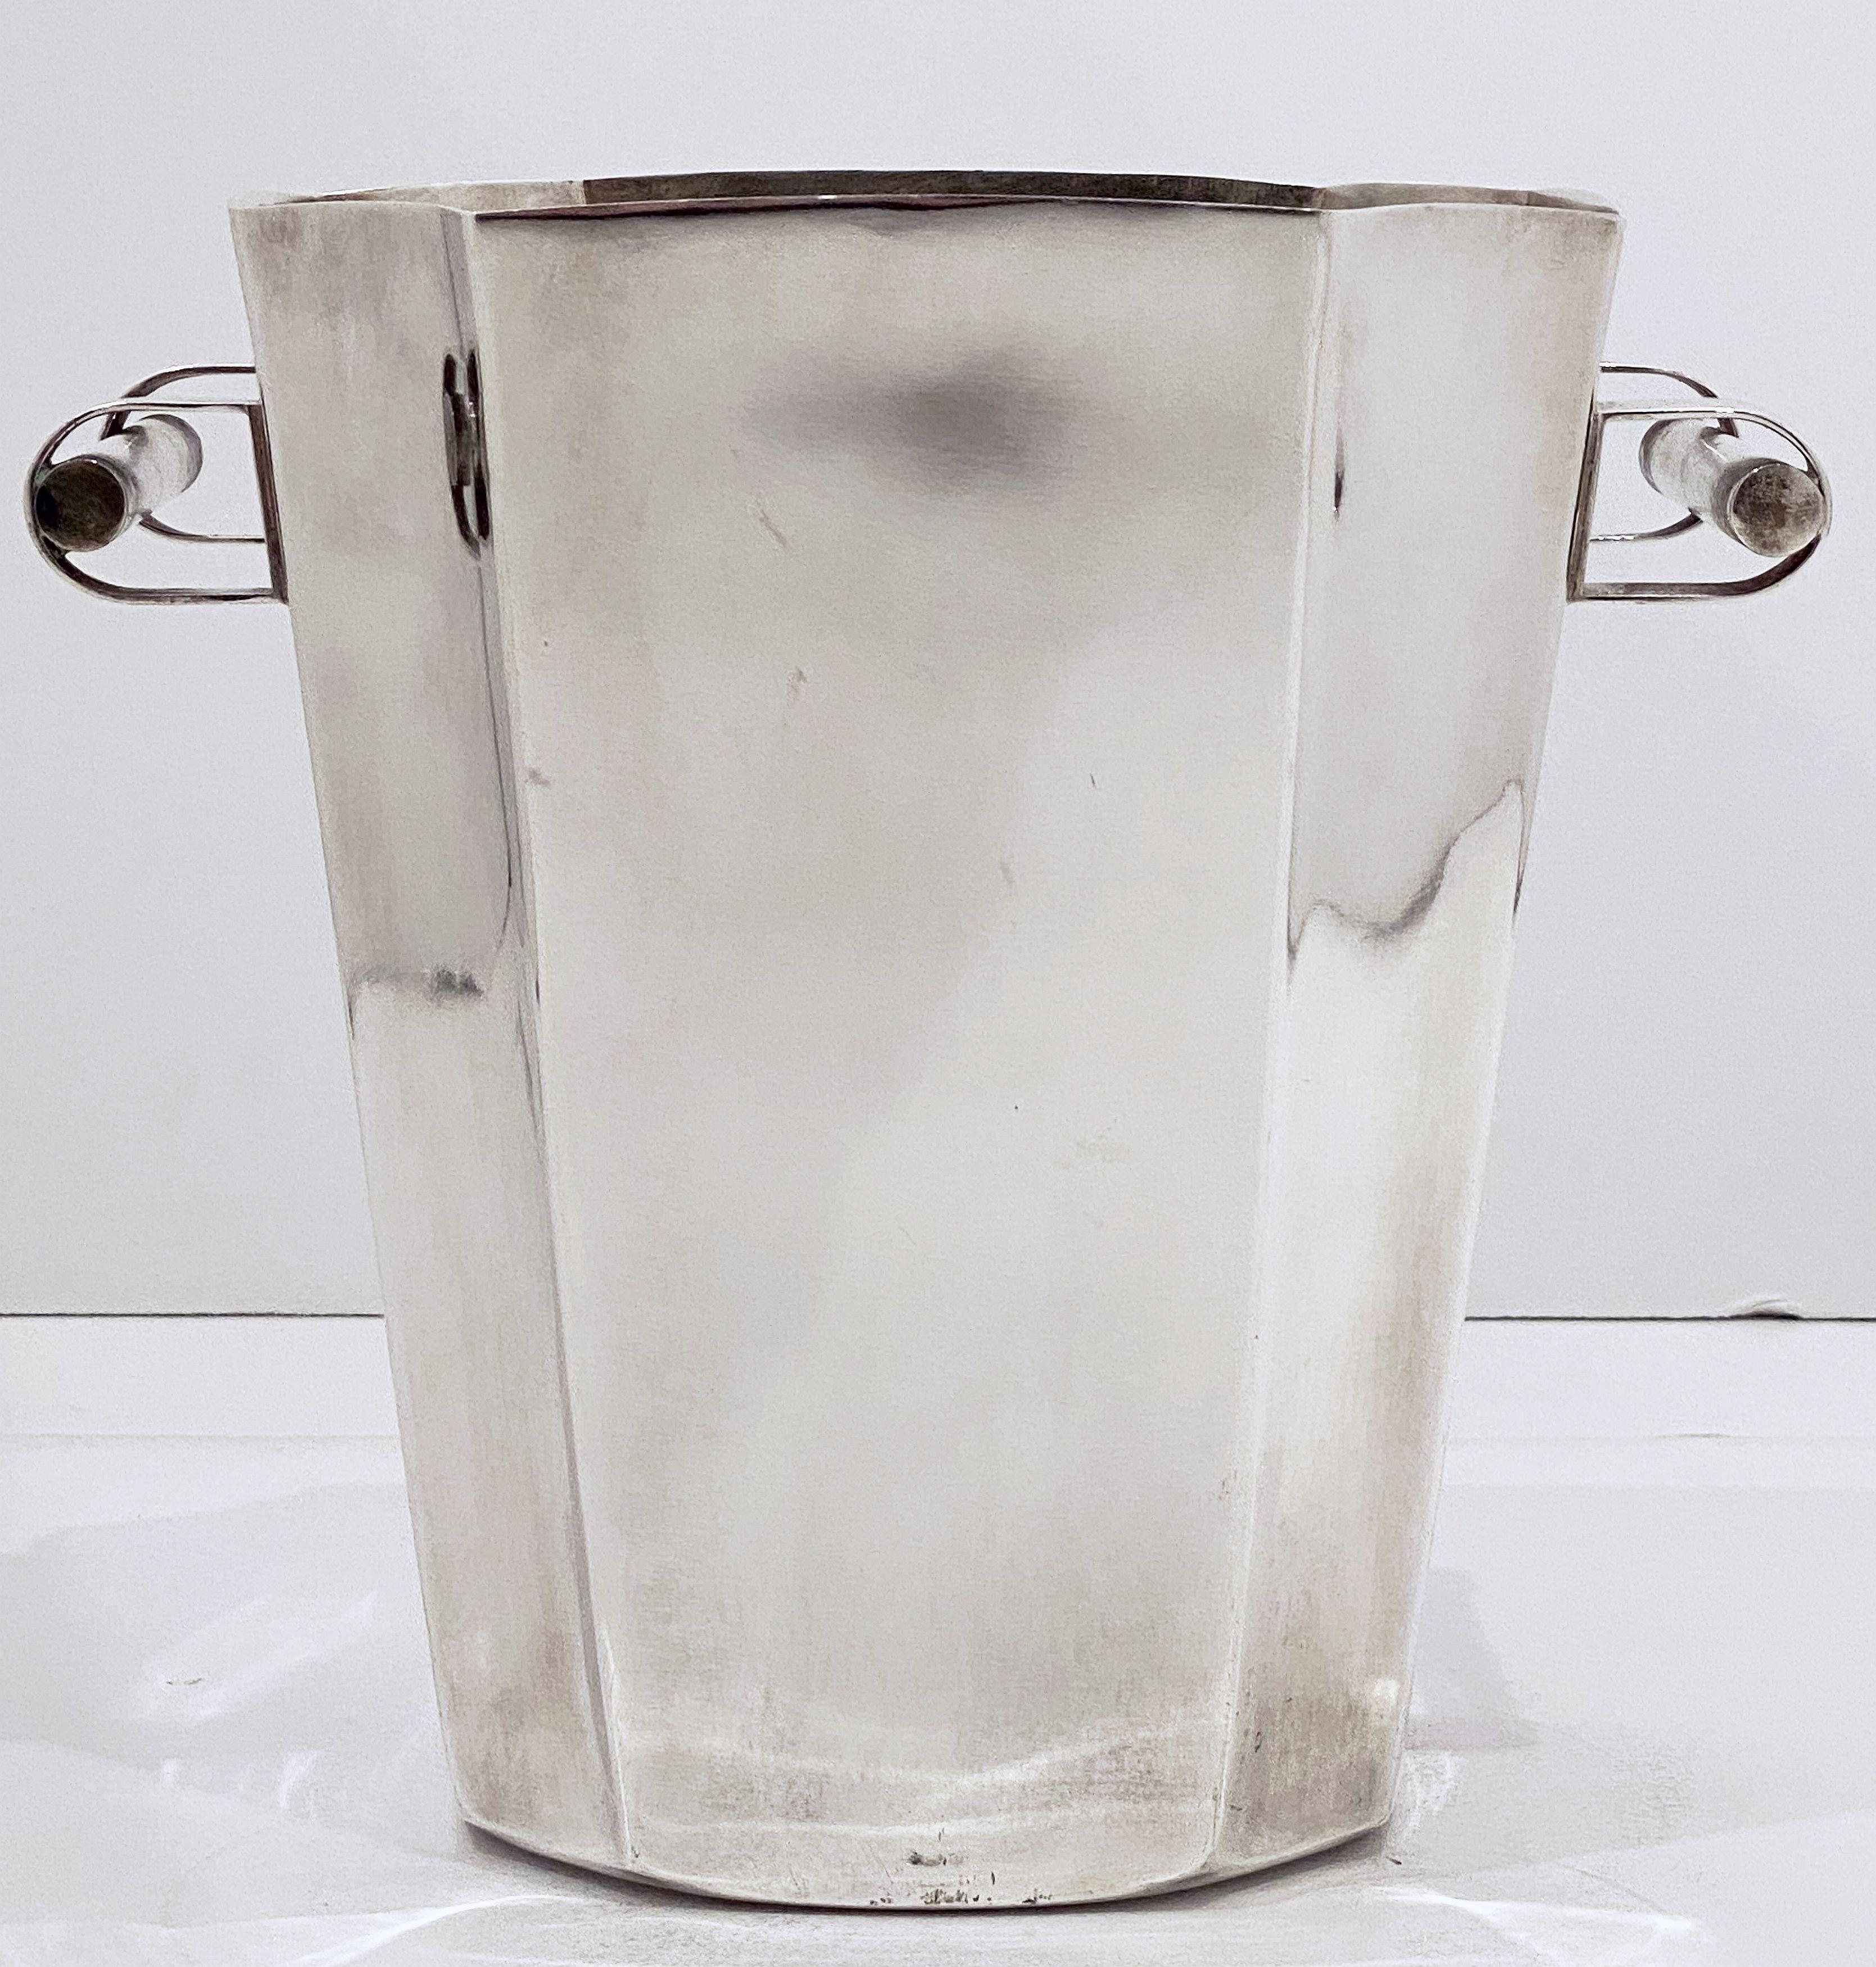 20th Century French Silver Champagne or Wine Cooler or Ice Bucket in the Art Deco Style